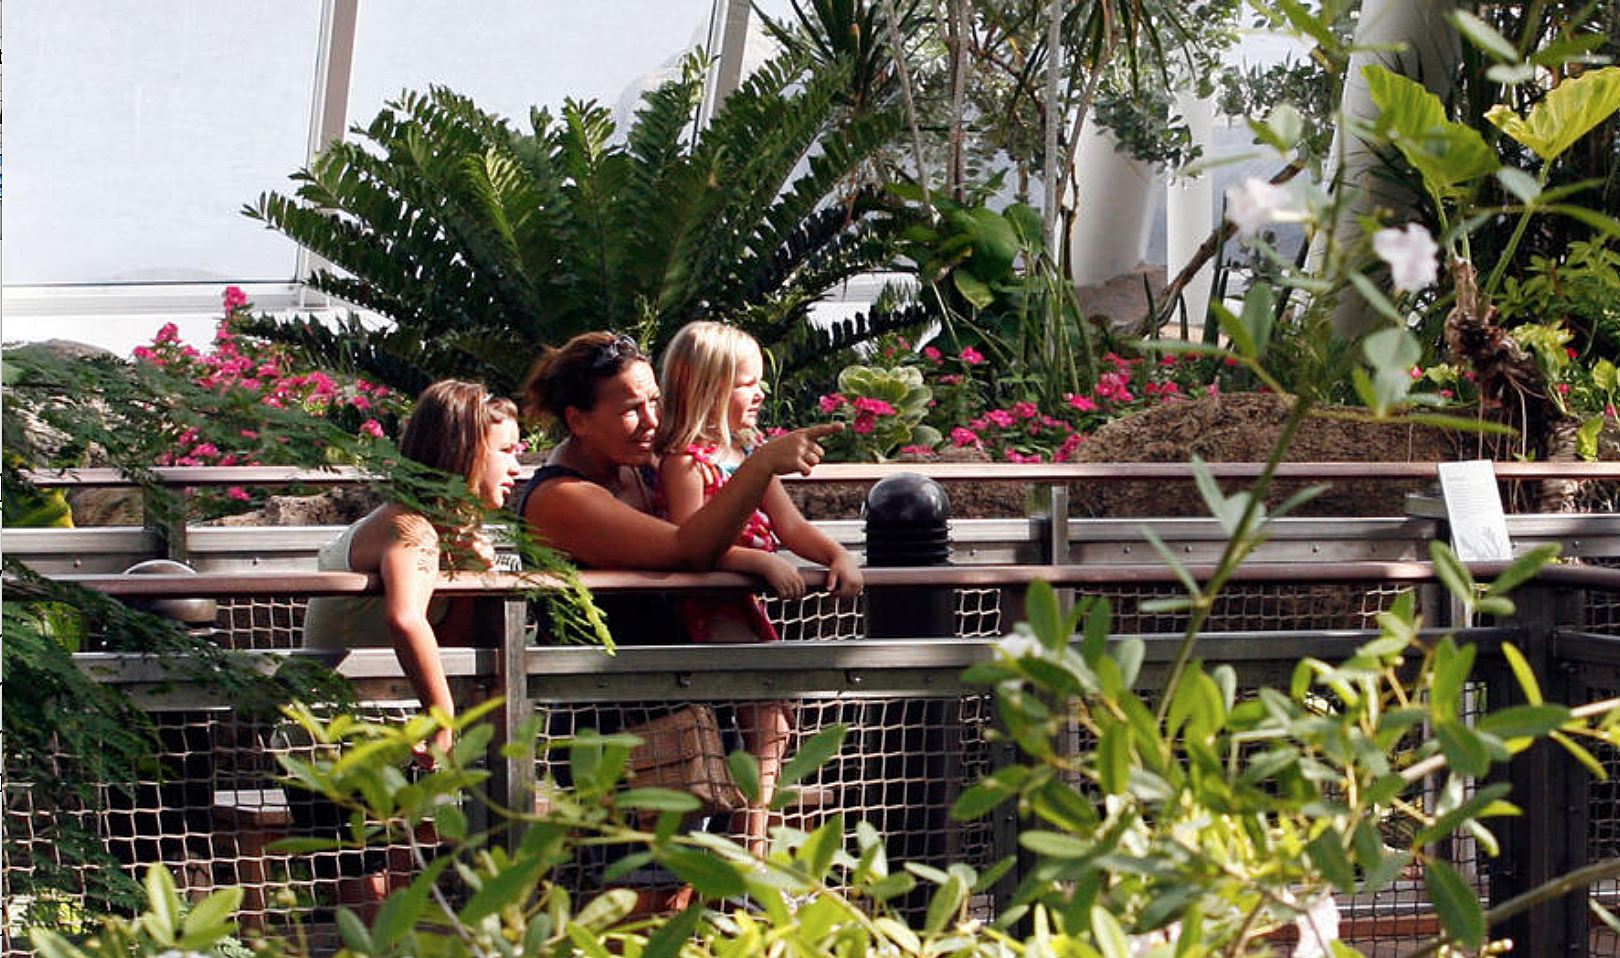 How To Save 50 At Moody Gardens With The Spring Break Value Pass